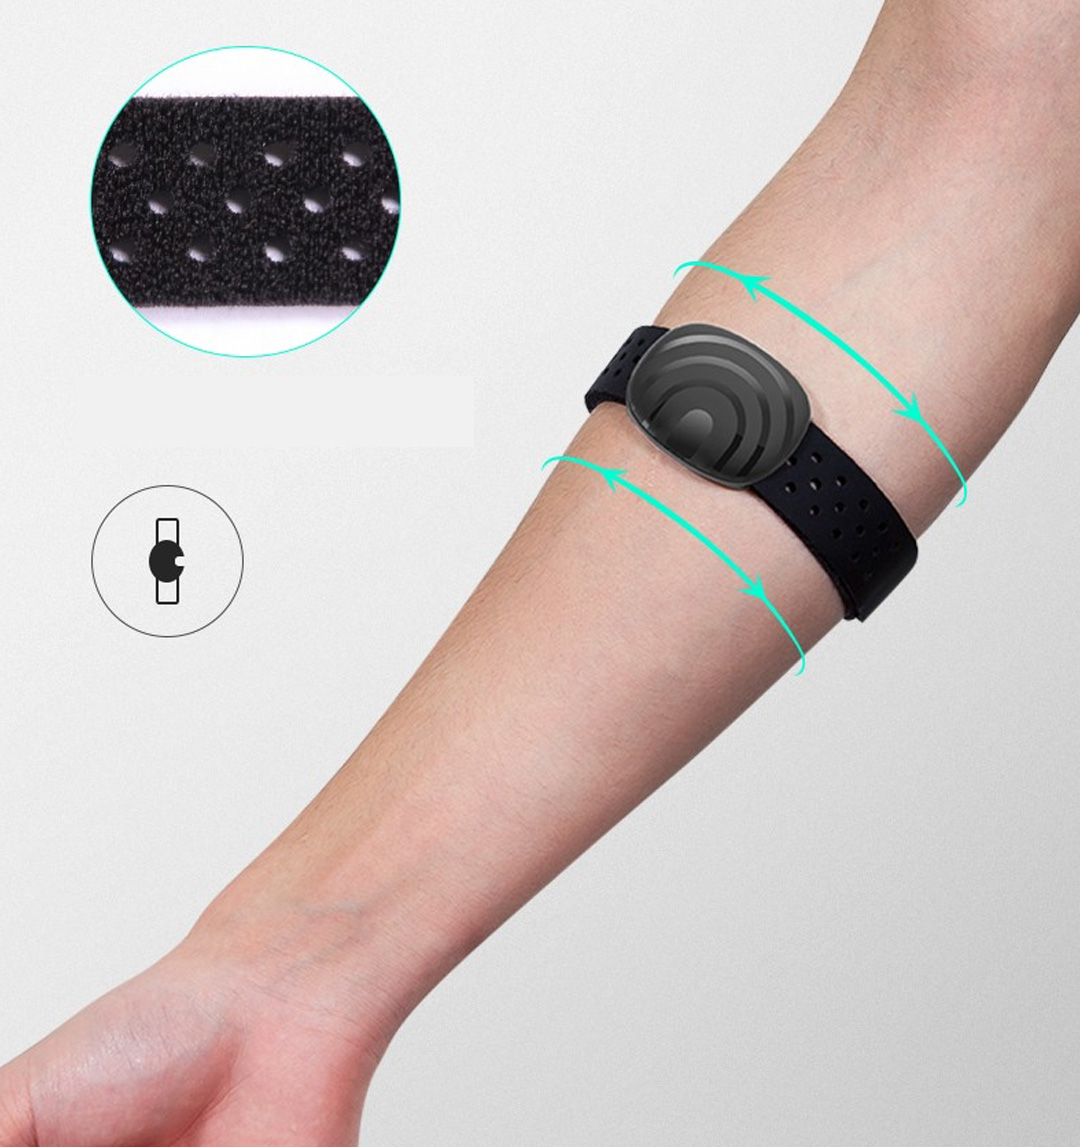 Yesoul Smart Heart Rate Monitor Arm Band